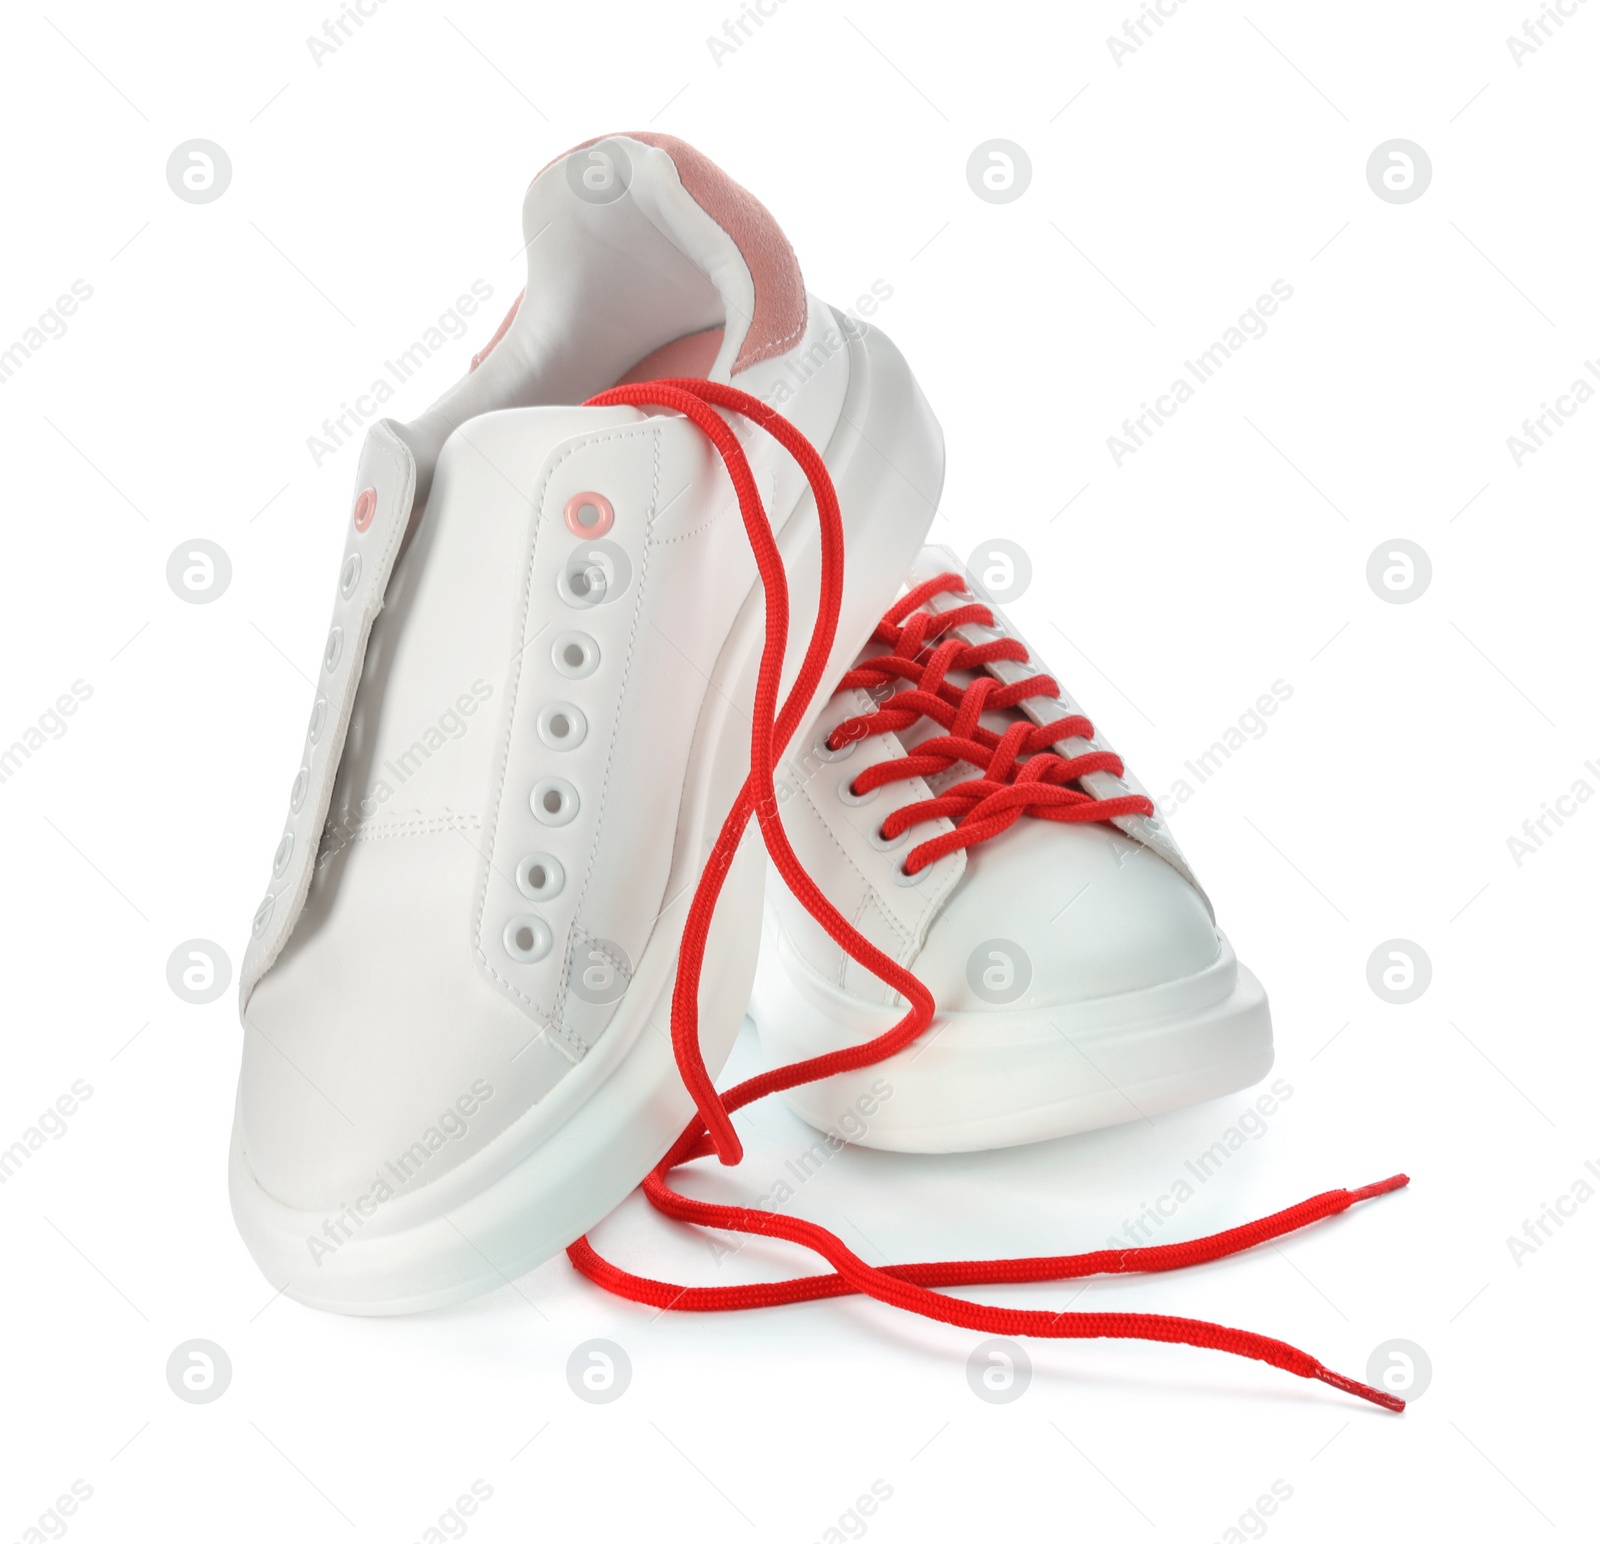 Photo of Stylish sneakers with red shoelaces on white background